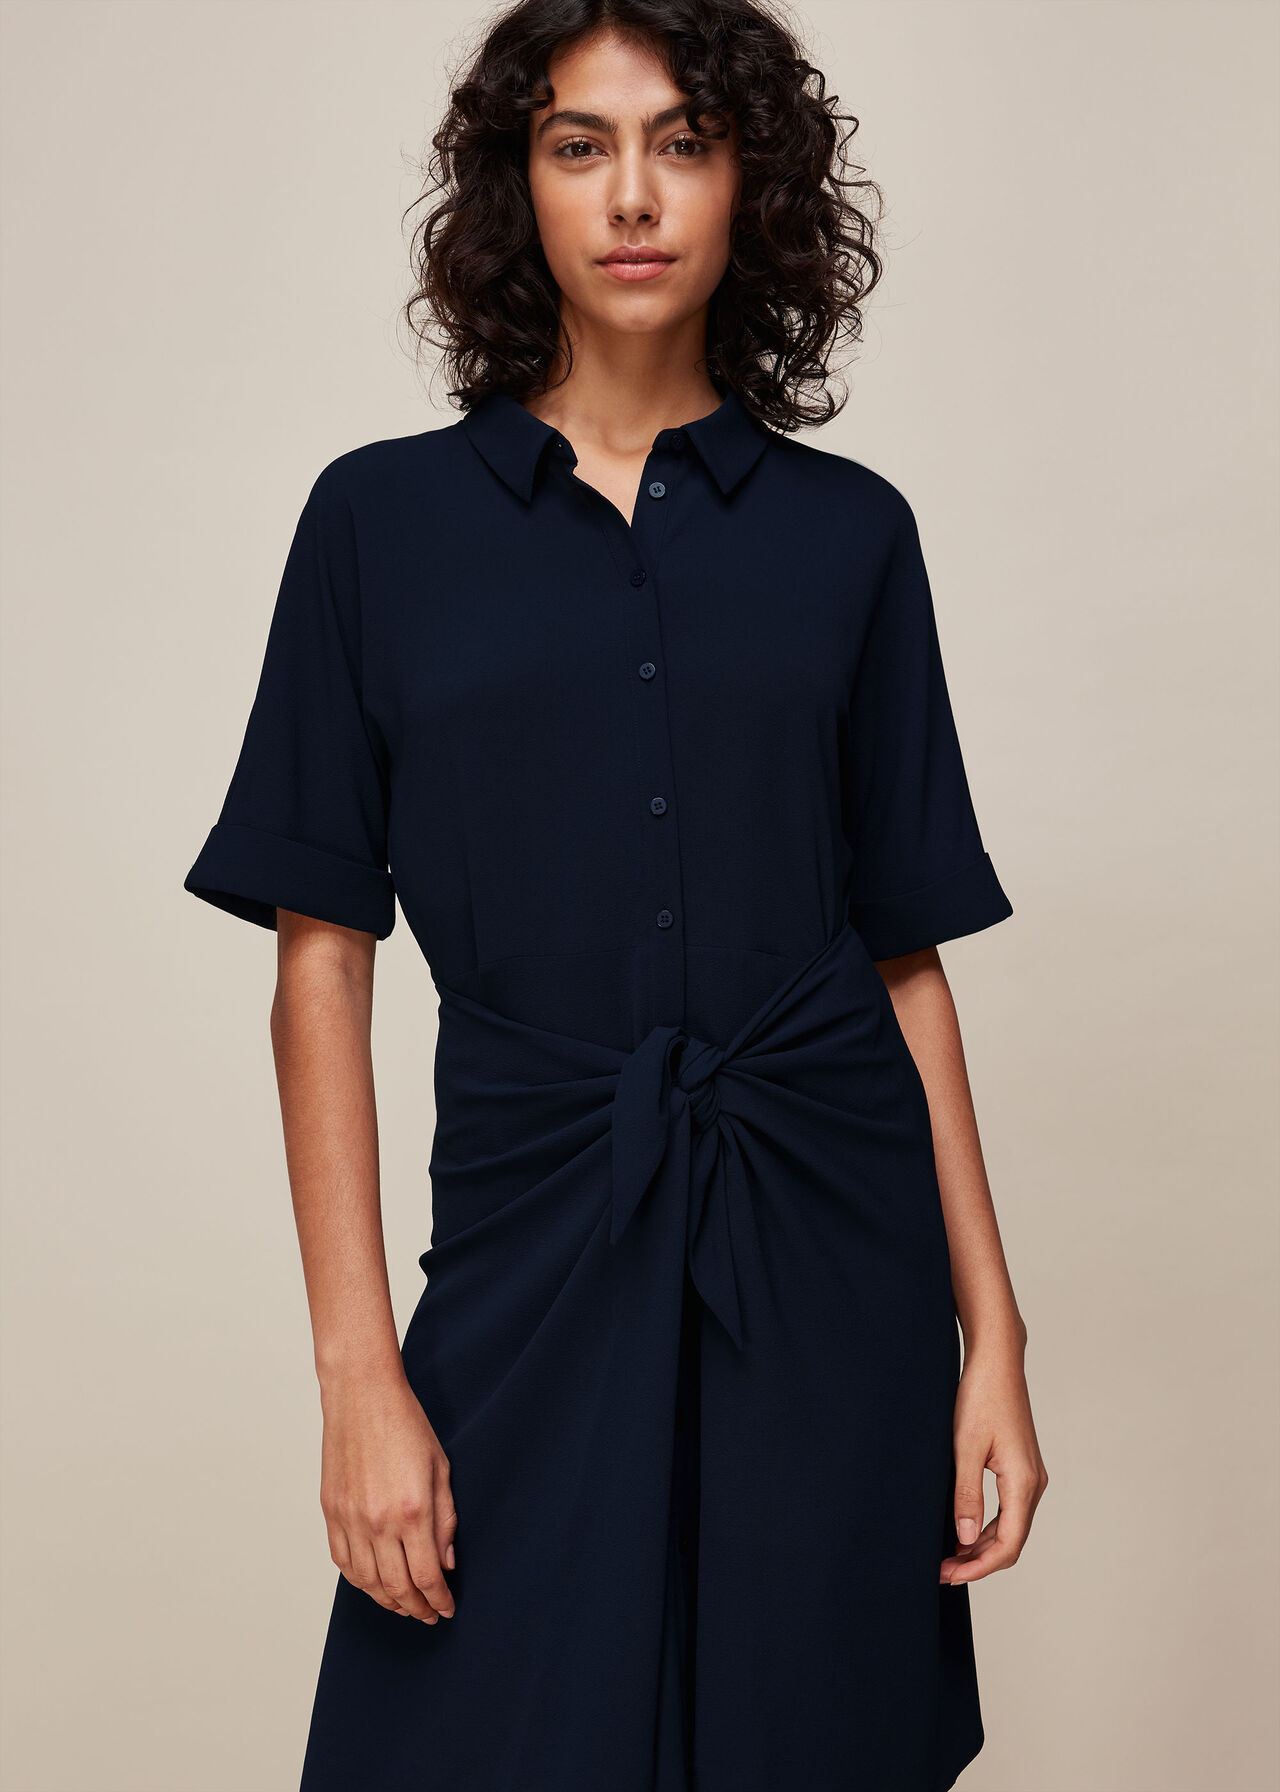 Dolly Tie Front Dress Navy